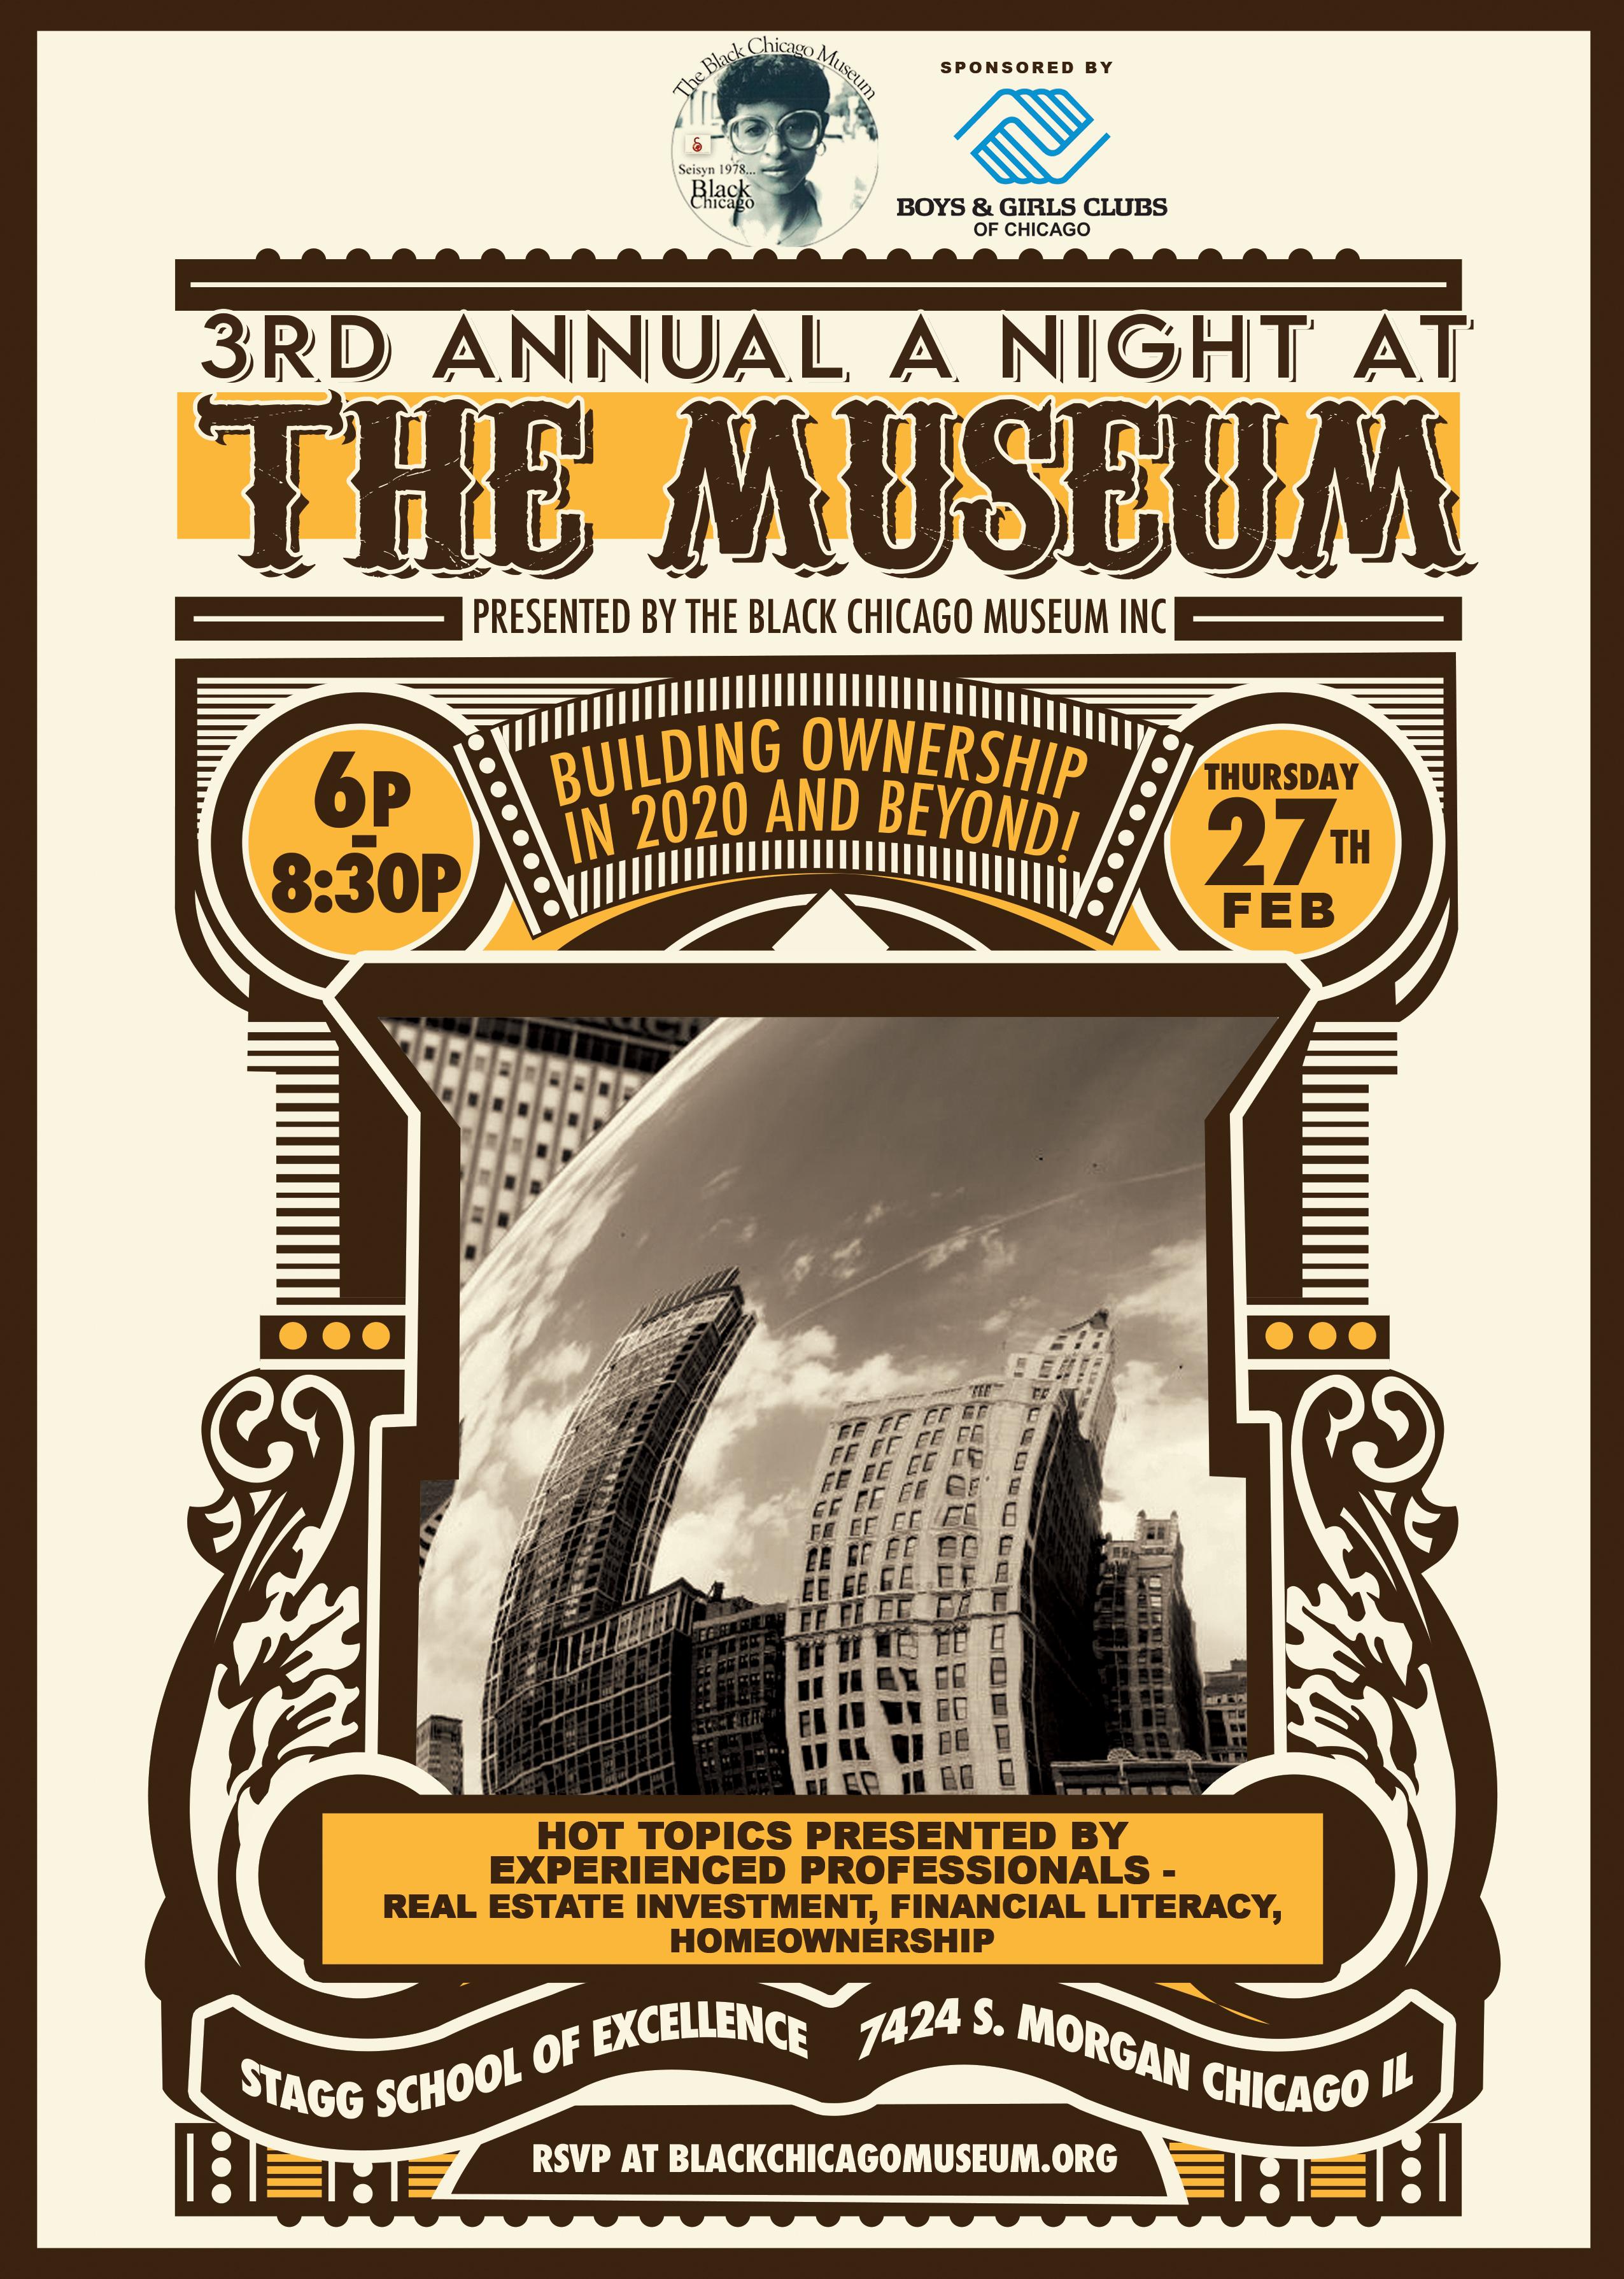 3rd Annual A Night at the MUSEUM - BUILDING OWNERSHIP in 2020 AND BEYOND!!!